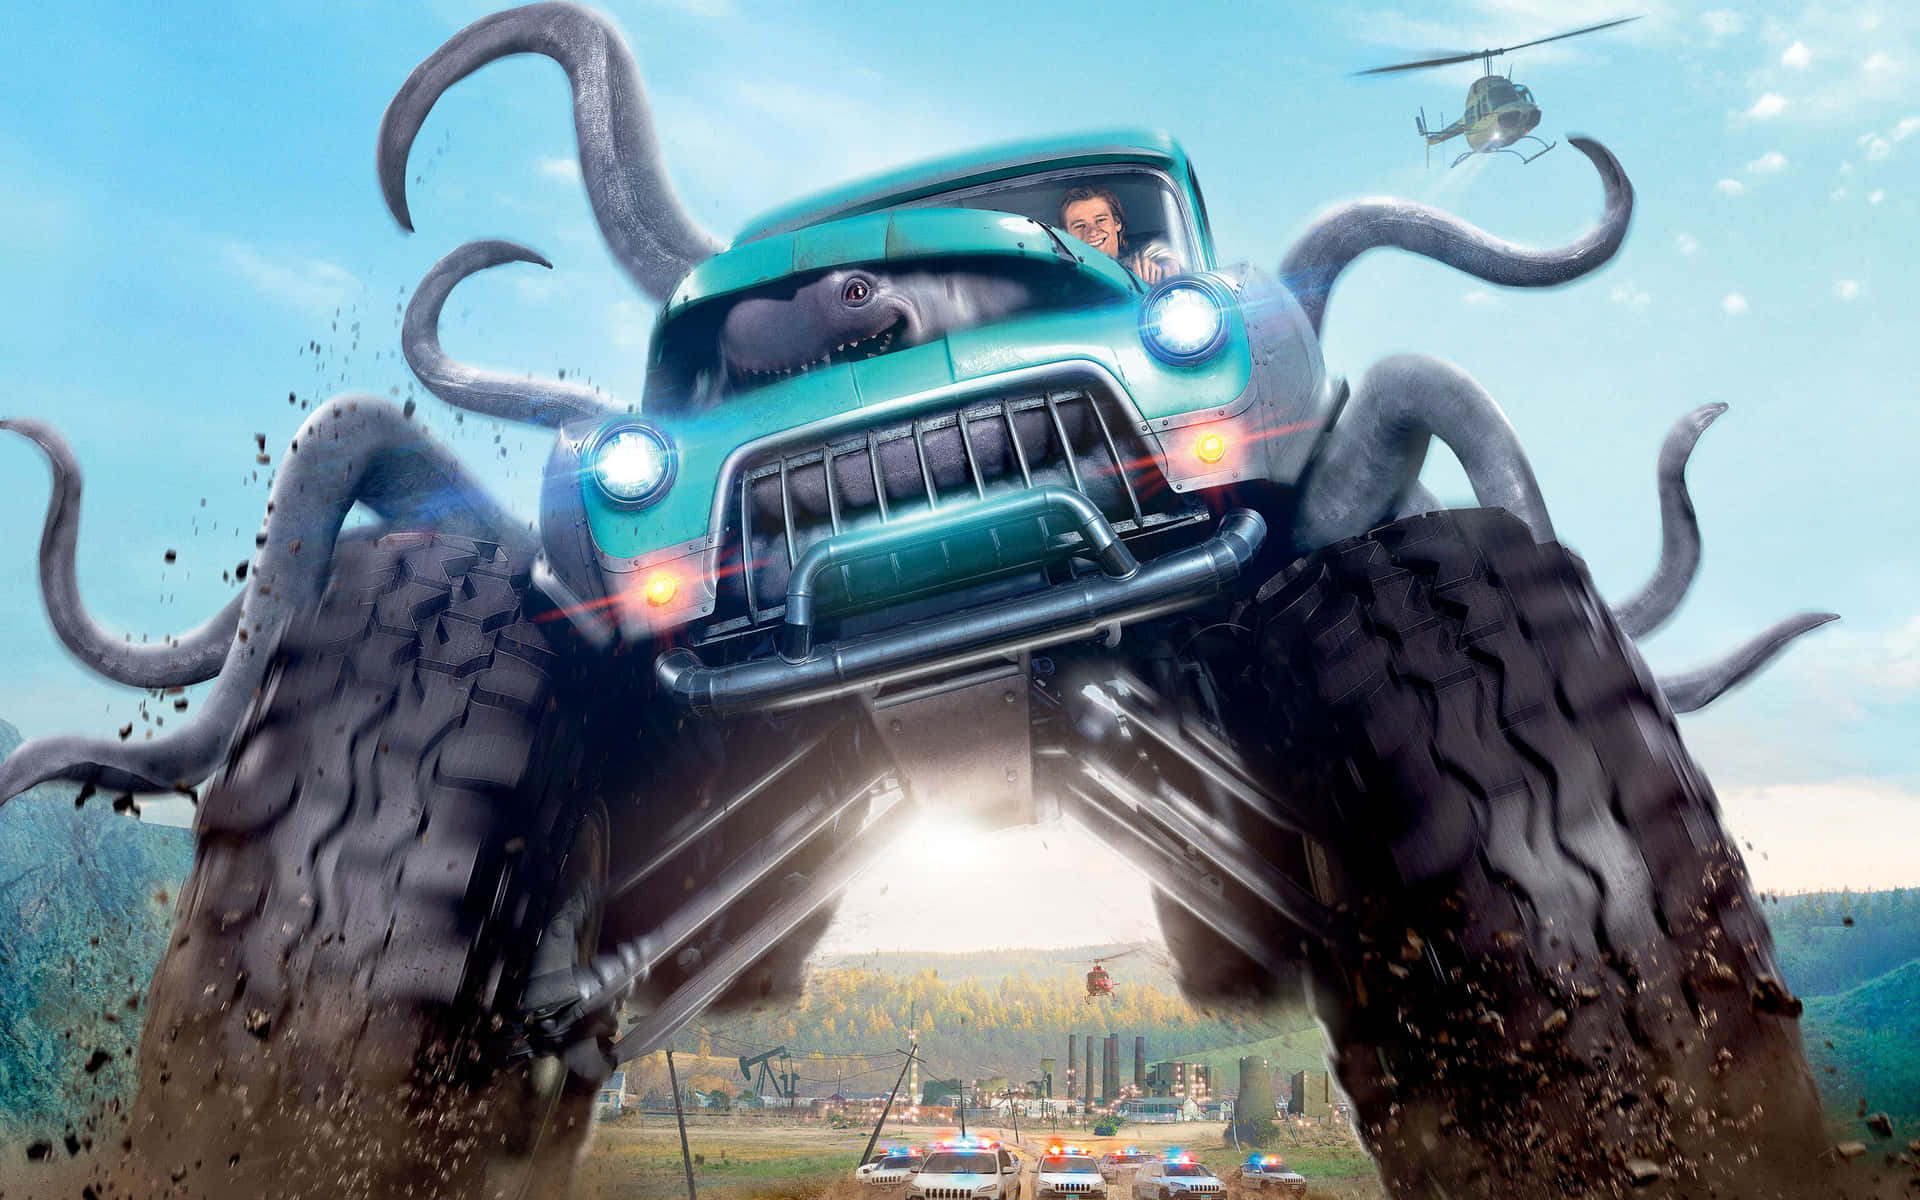 Cheer on an awesome monster truck ride!